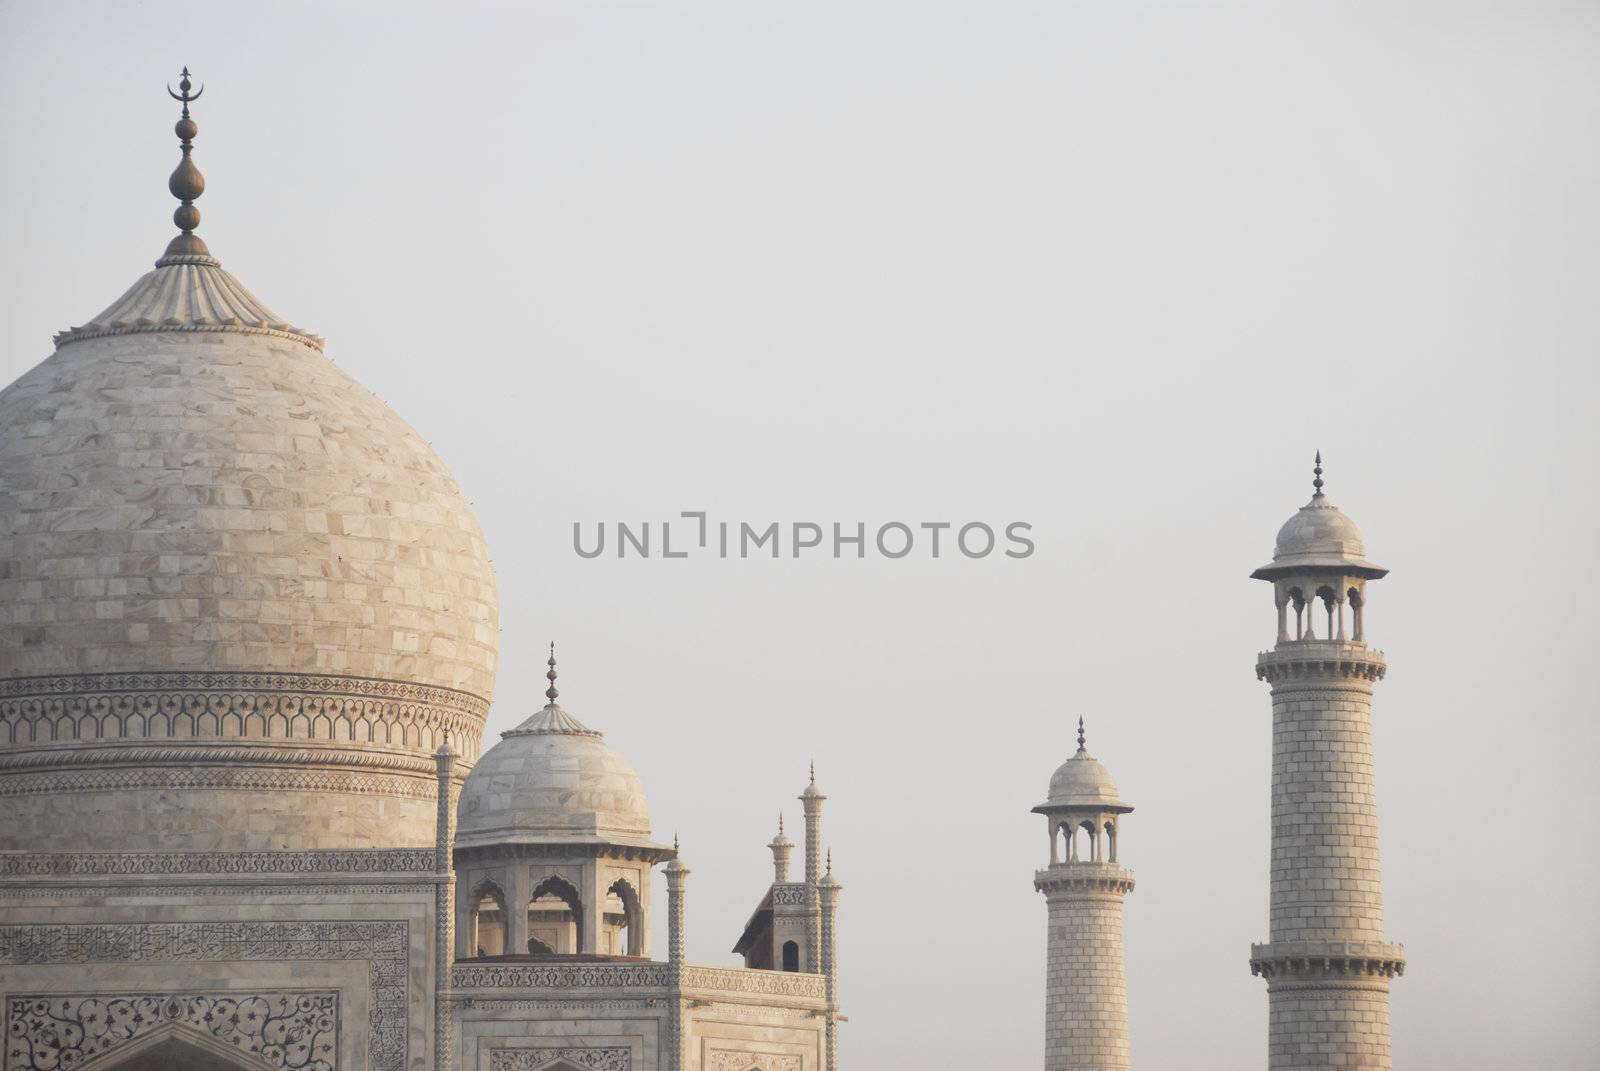 A view of the domes and minarets of the Taj Mahal mausoleum in Agra, India